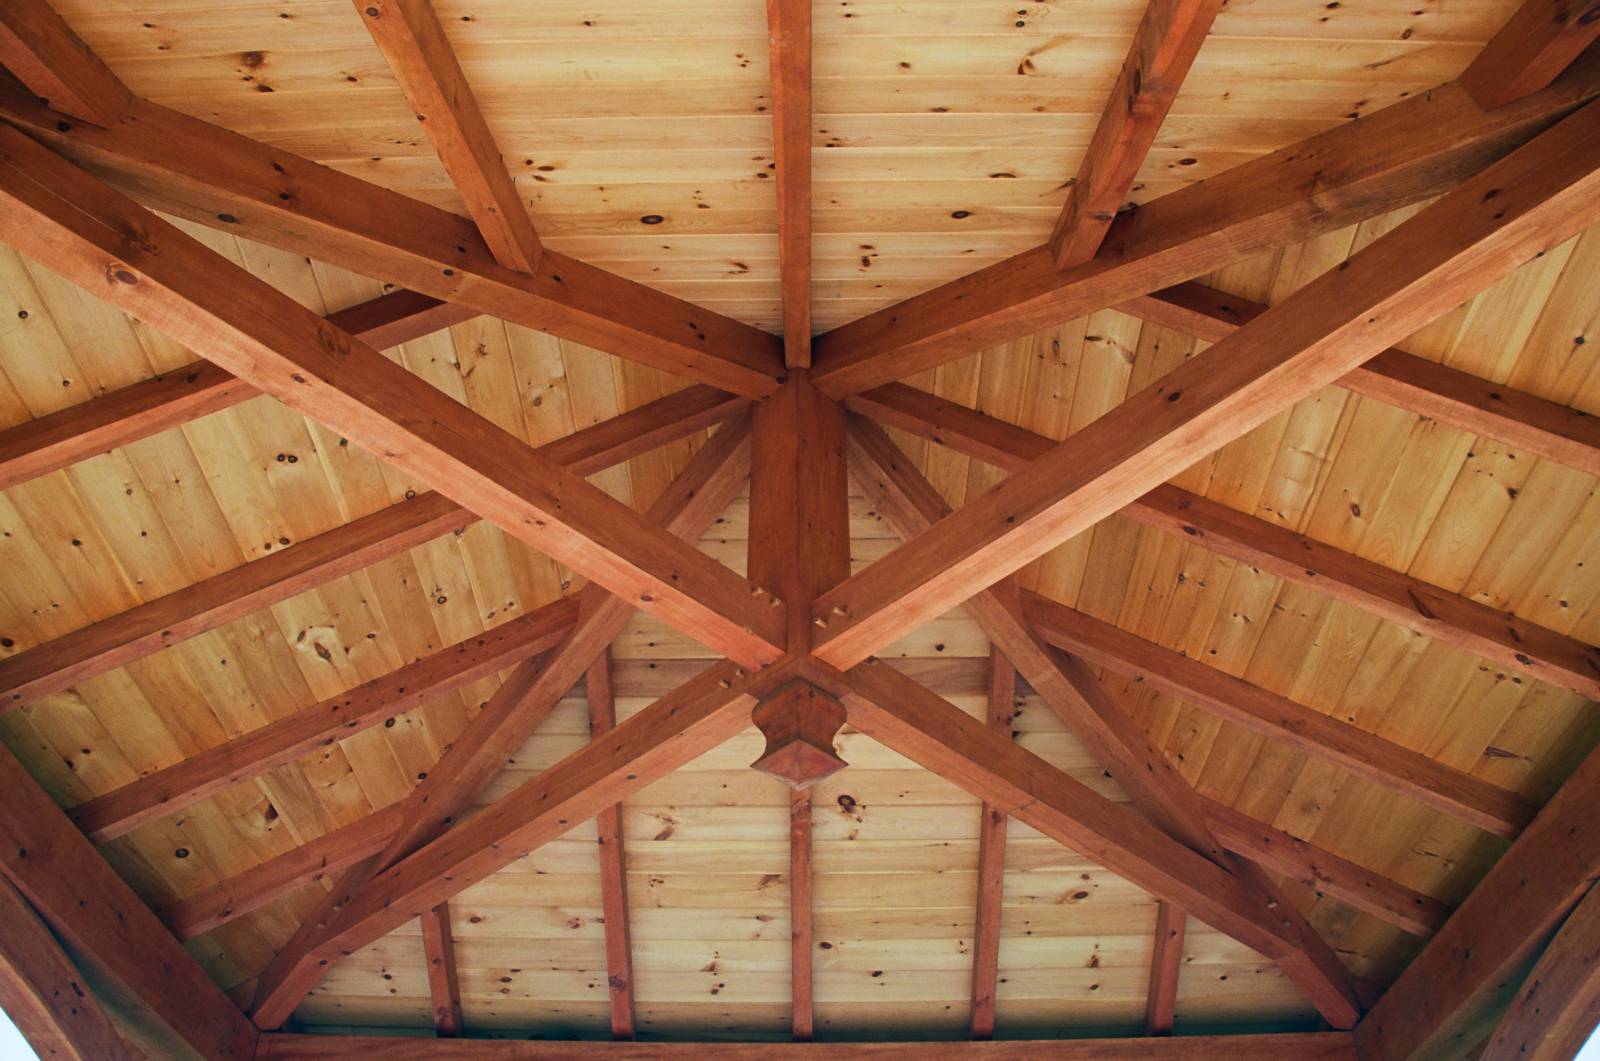 Inside the Timber Frame Pavilion with Boss Pin